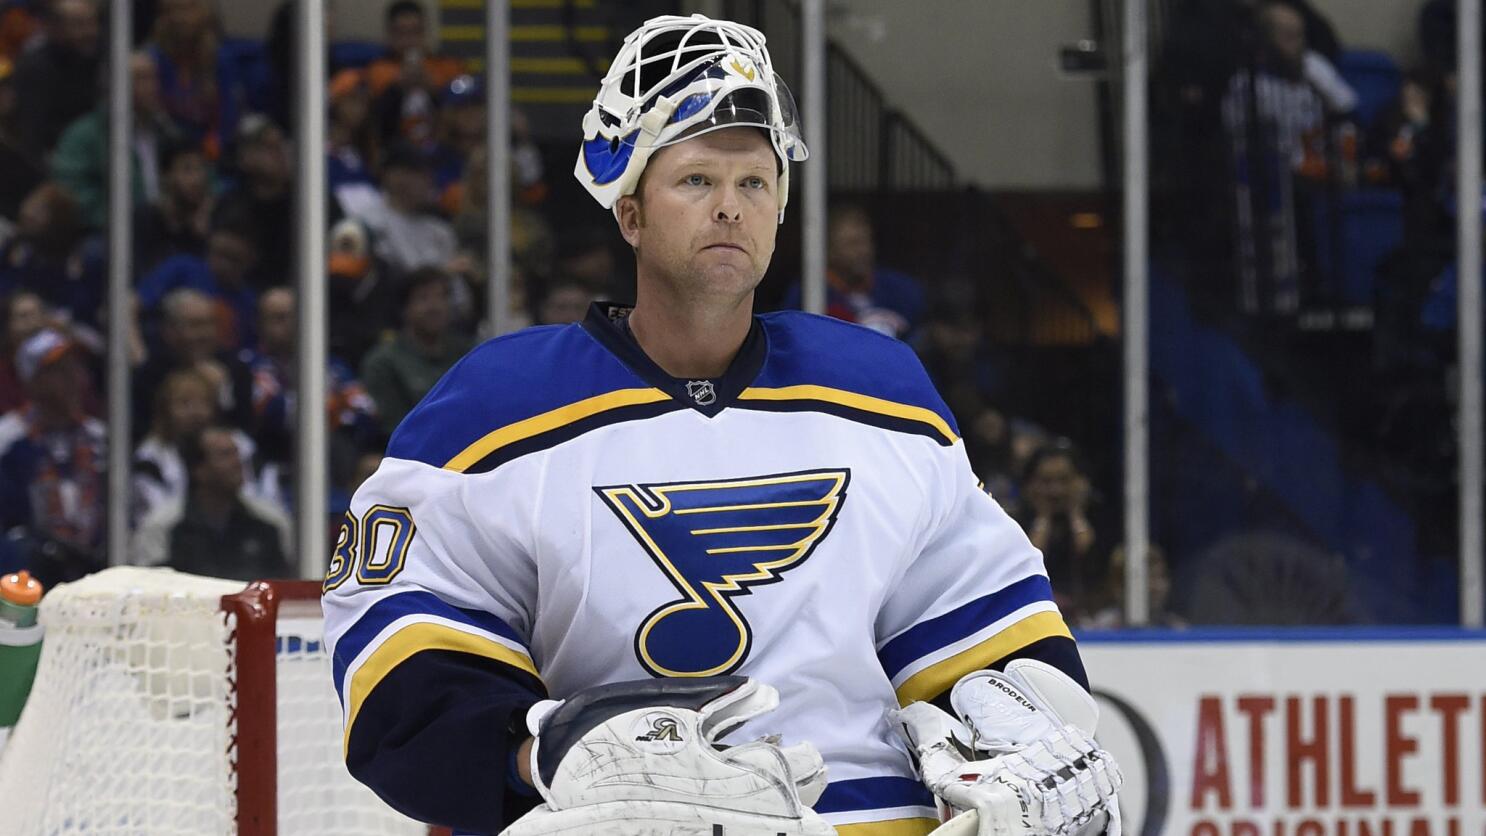 Martin Brodeur to retire, become Blues asst. GM (Updated) - NBC Sports